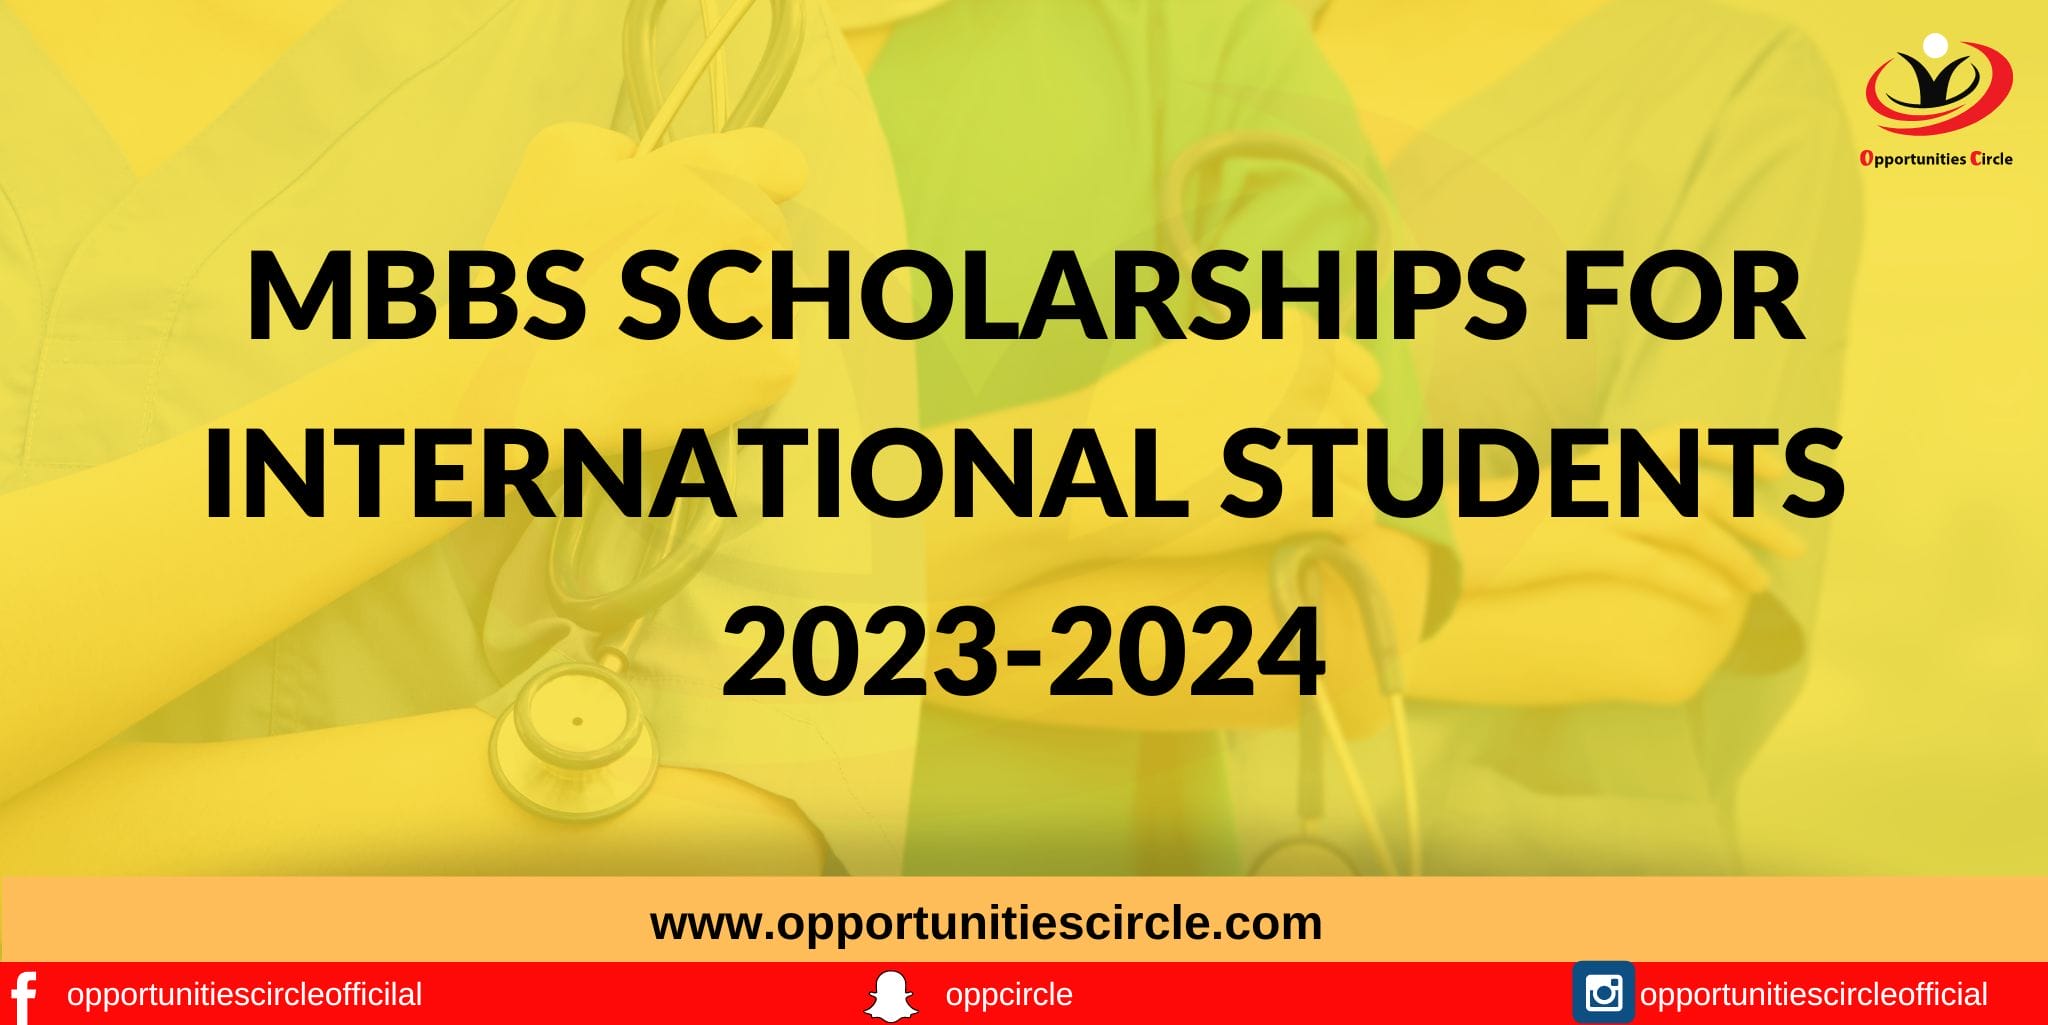 MBBS Scholarships for International Students 2024 Opportunities Circle